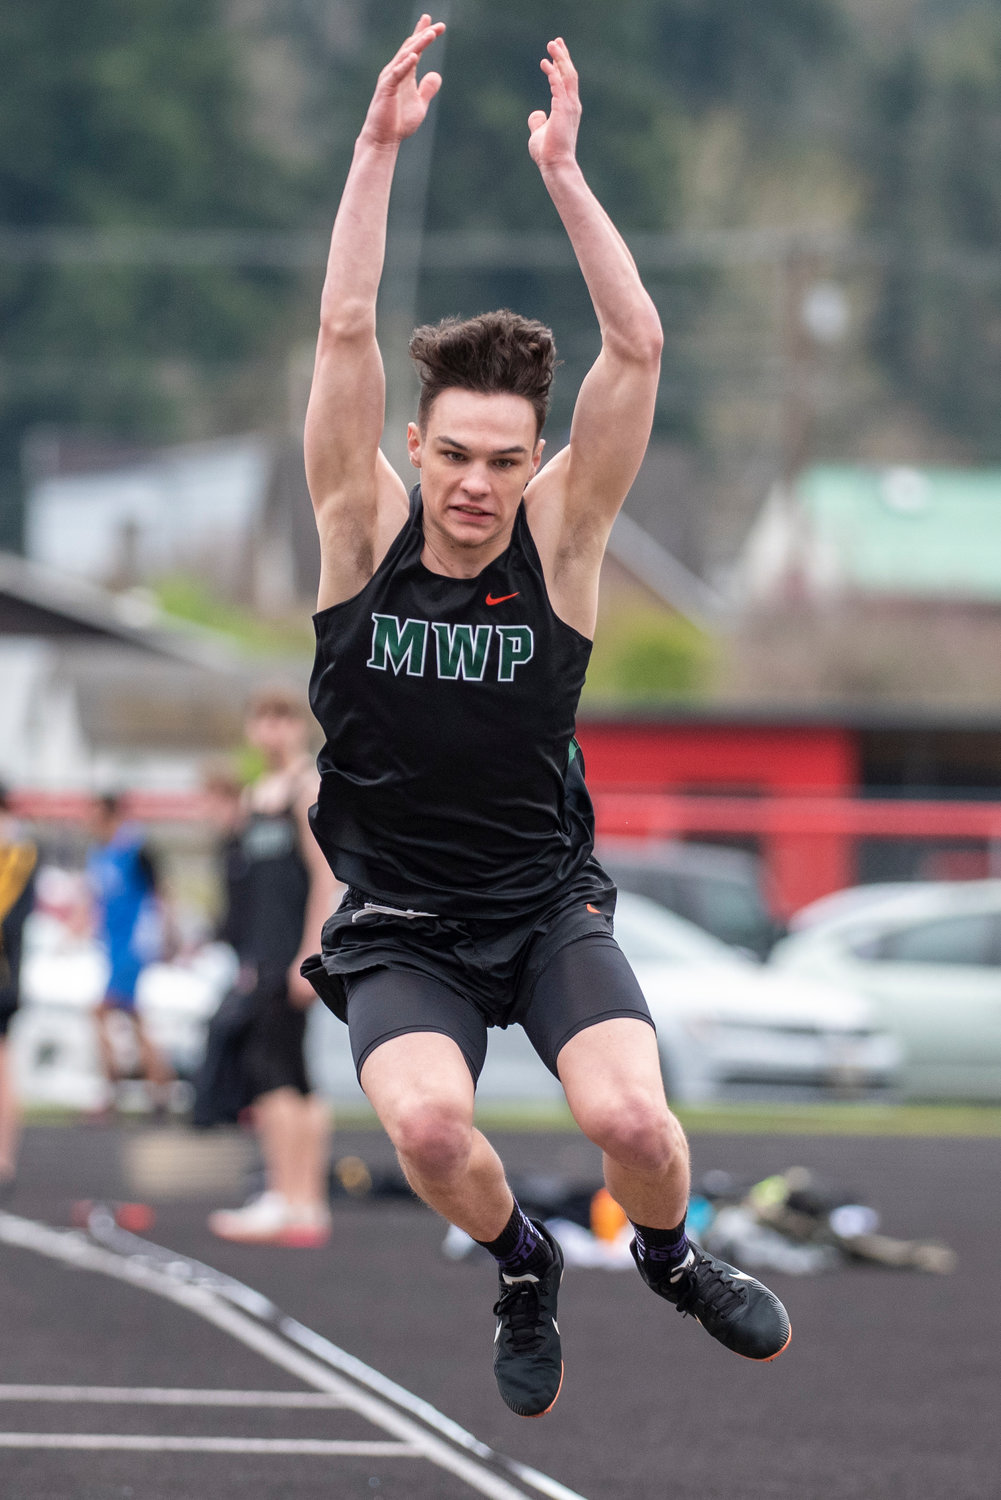 Morton-White Pass' Kysen Collette leaps in the boys long jump during a meet in Tenino on March 29.